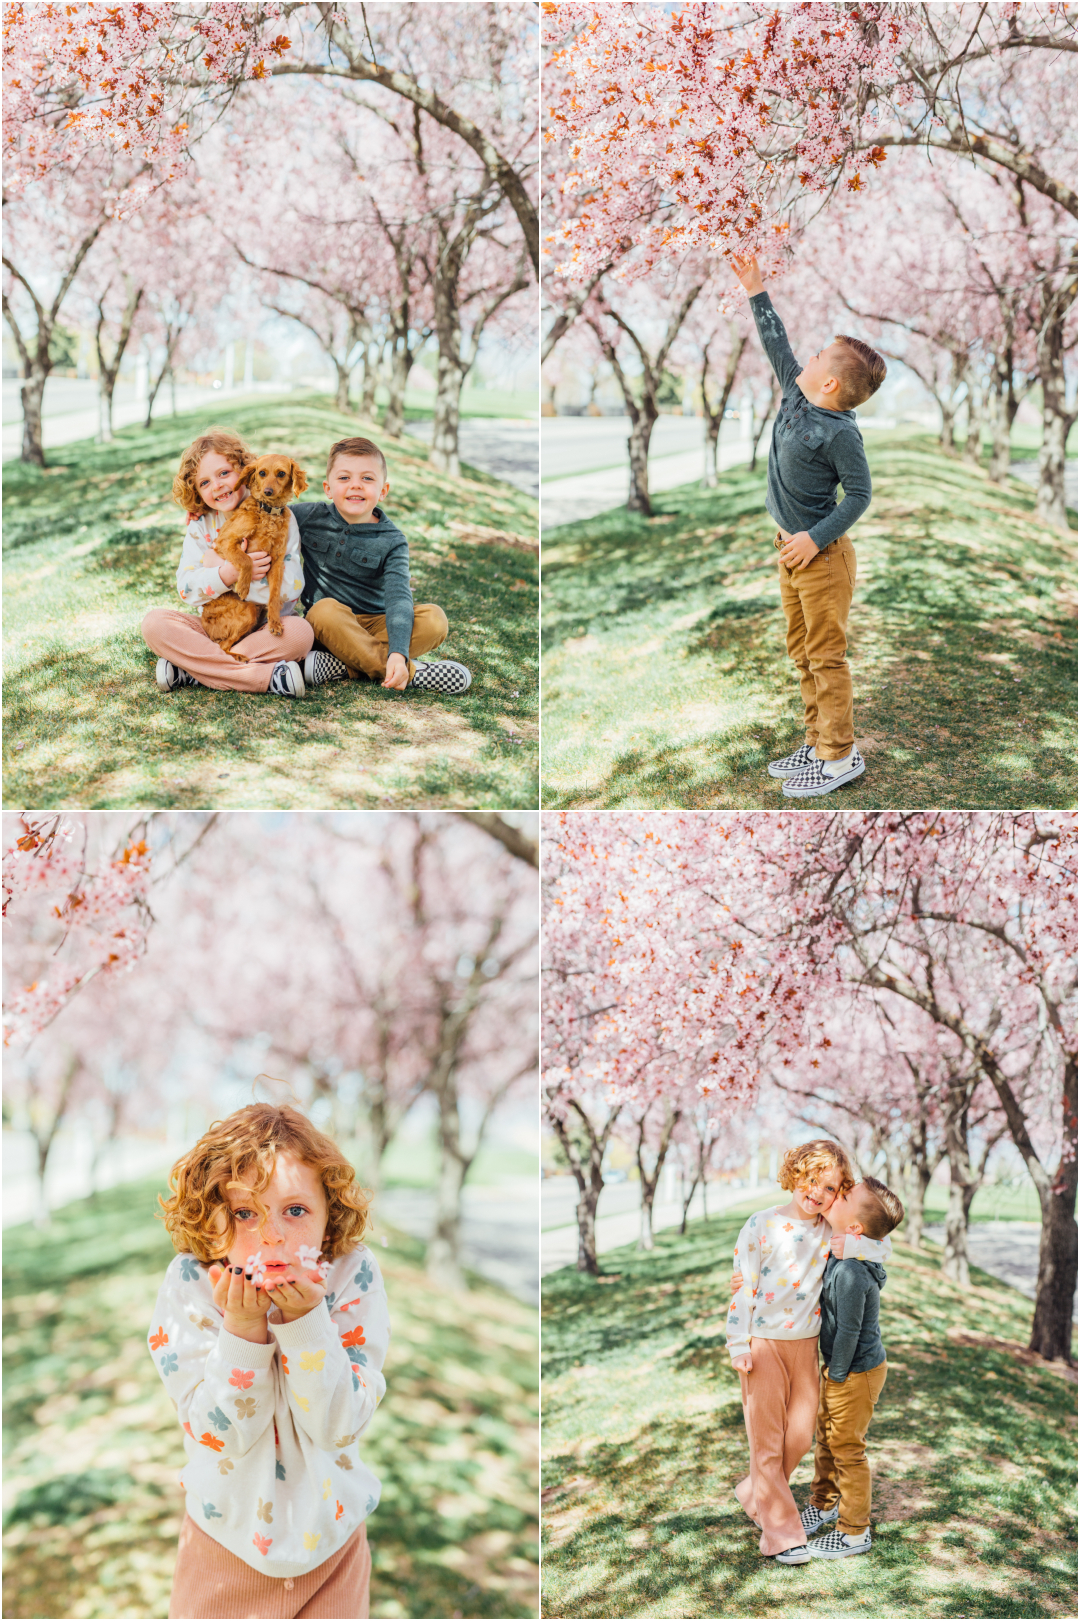 Utah Spring Family Photography Locations in Utah County - Provo Pink Blossoms